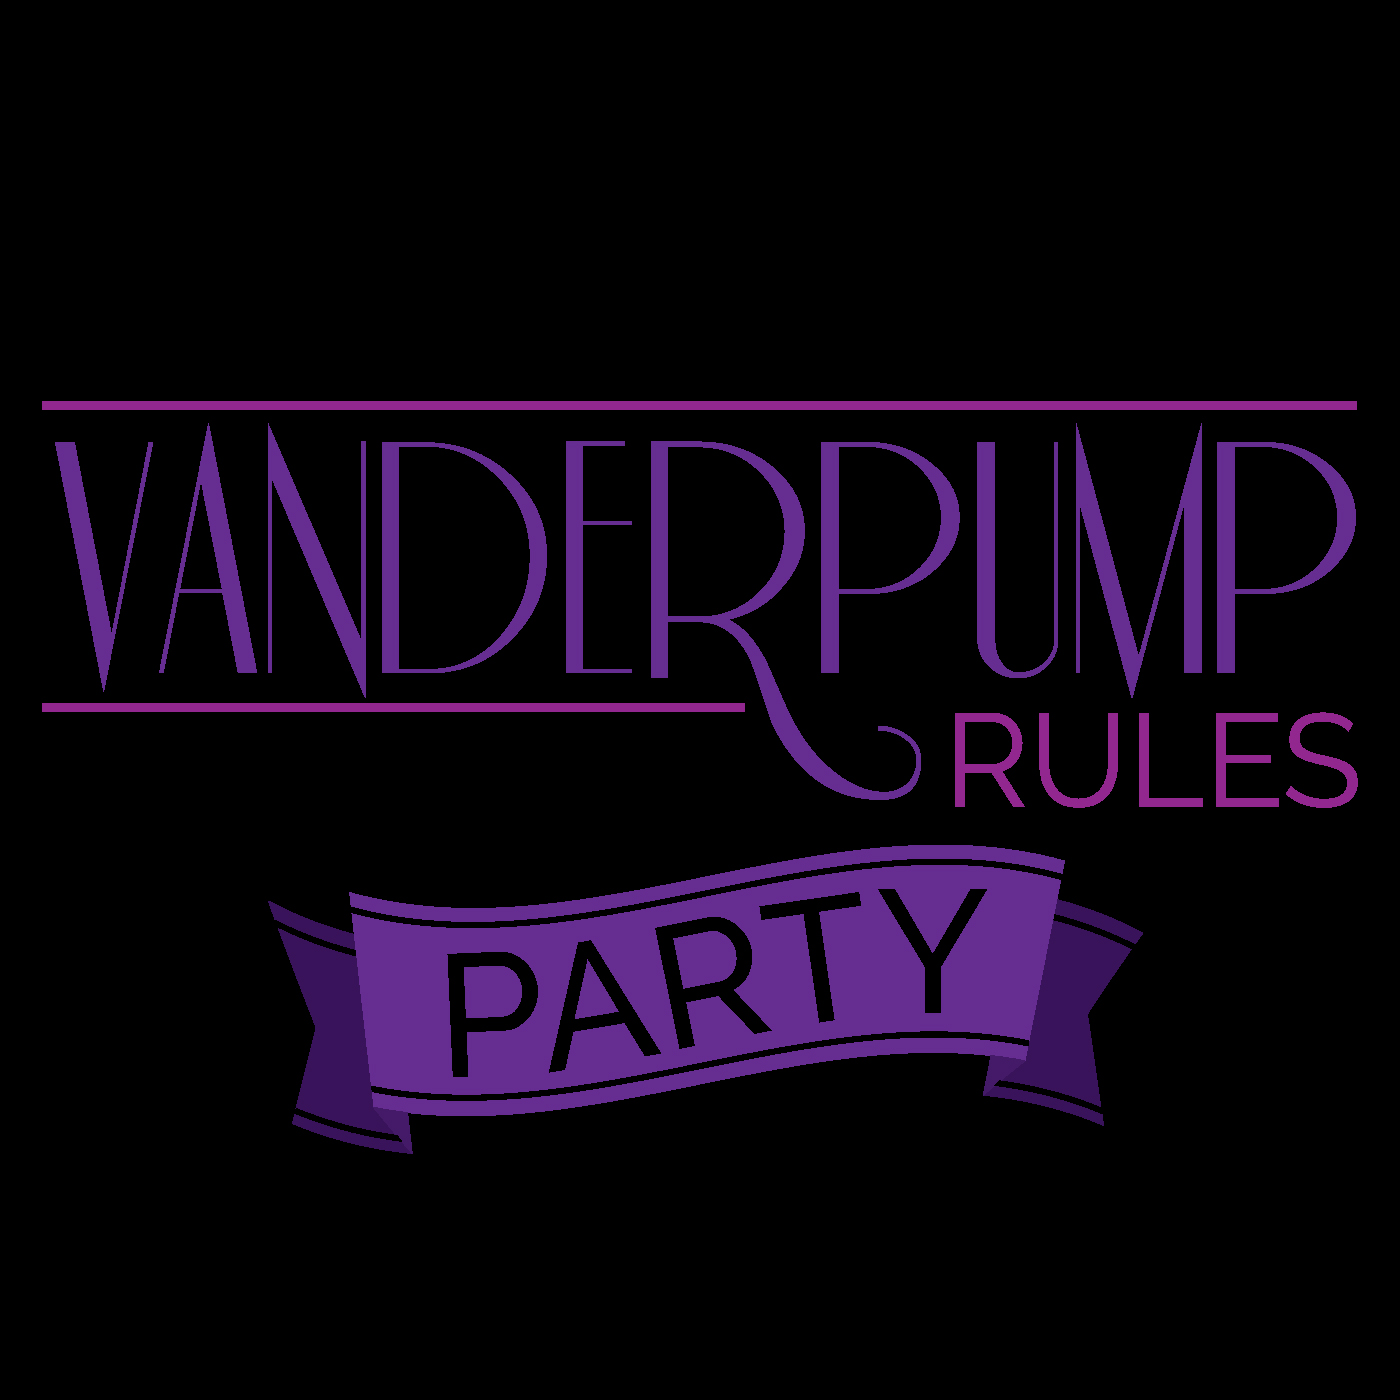 Artwork for podcast Vanderpump Rules Party